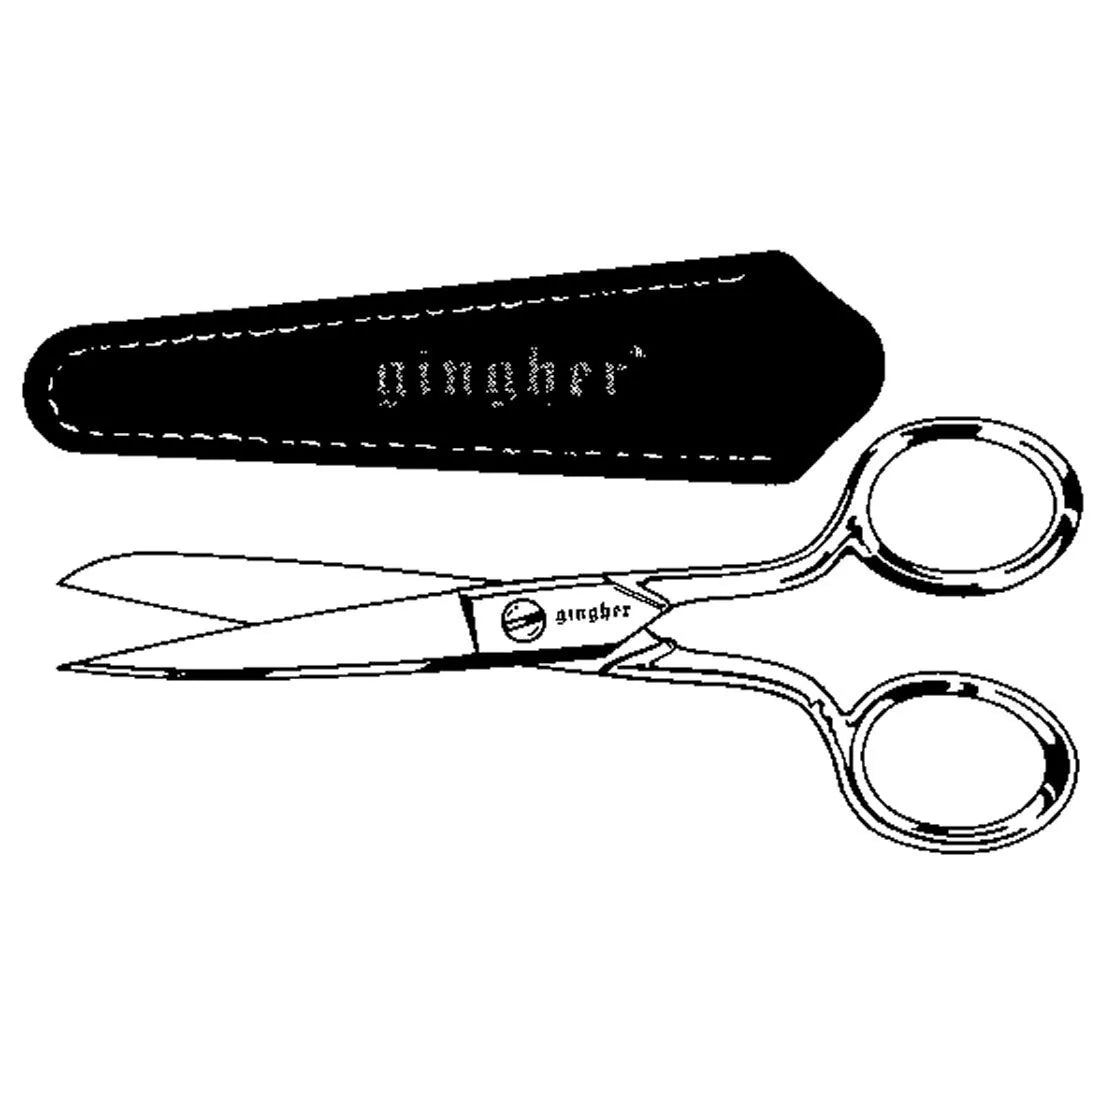 Gingher 5" Knife-Edge Sewing Scissors